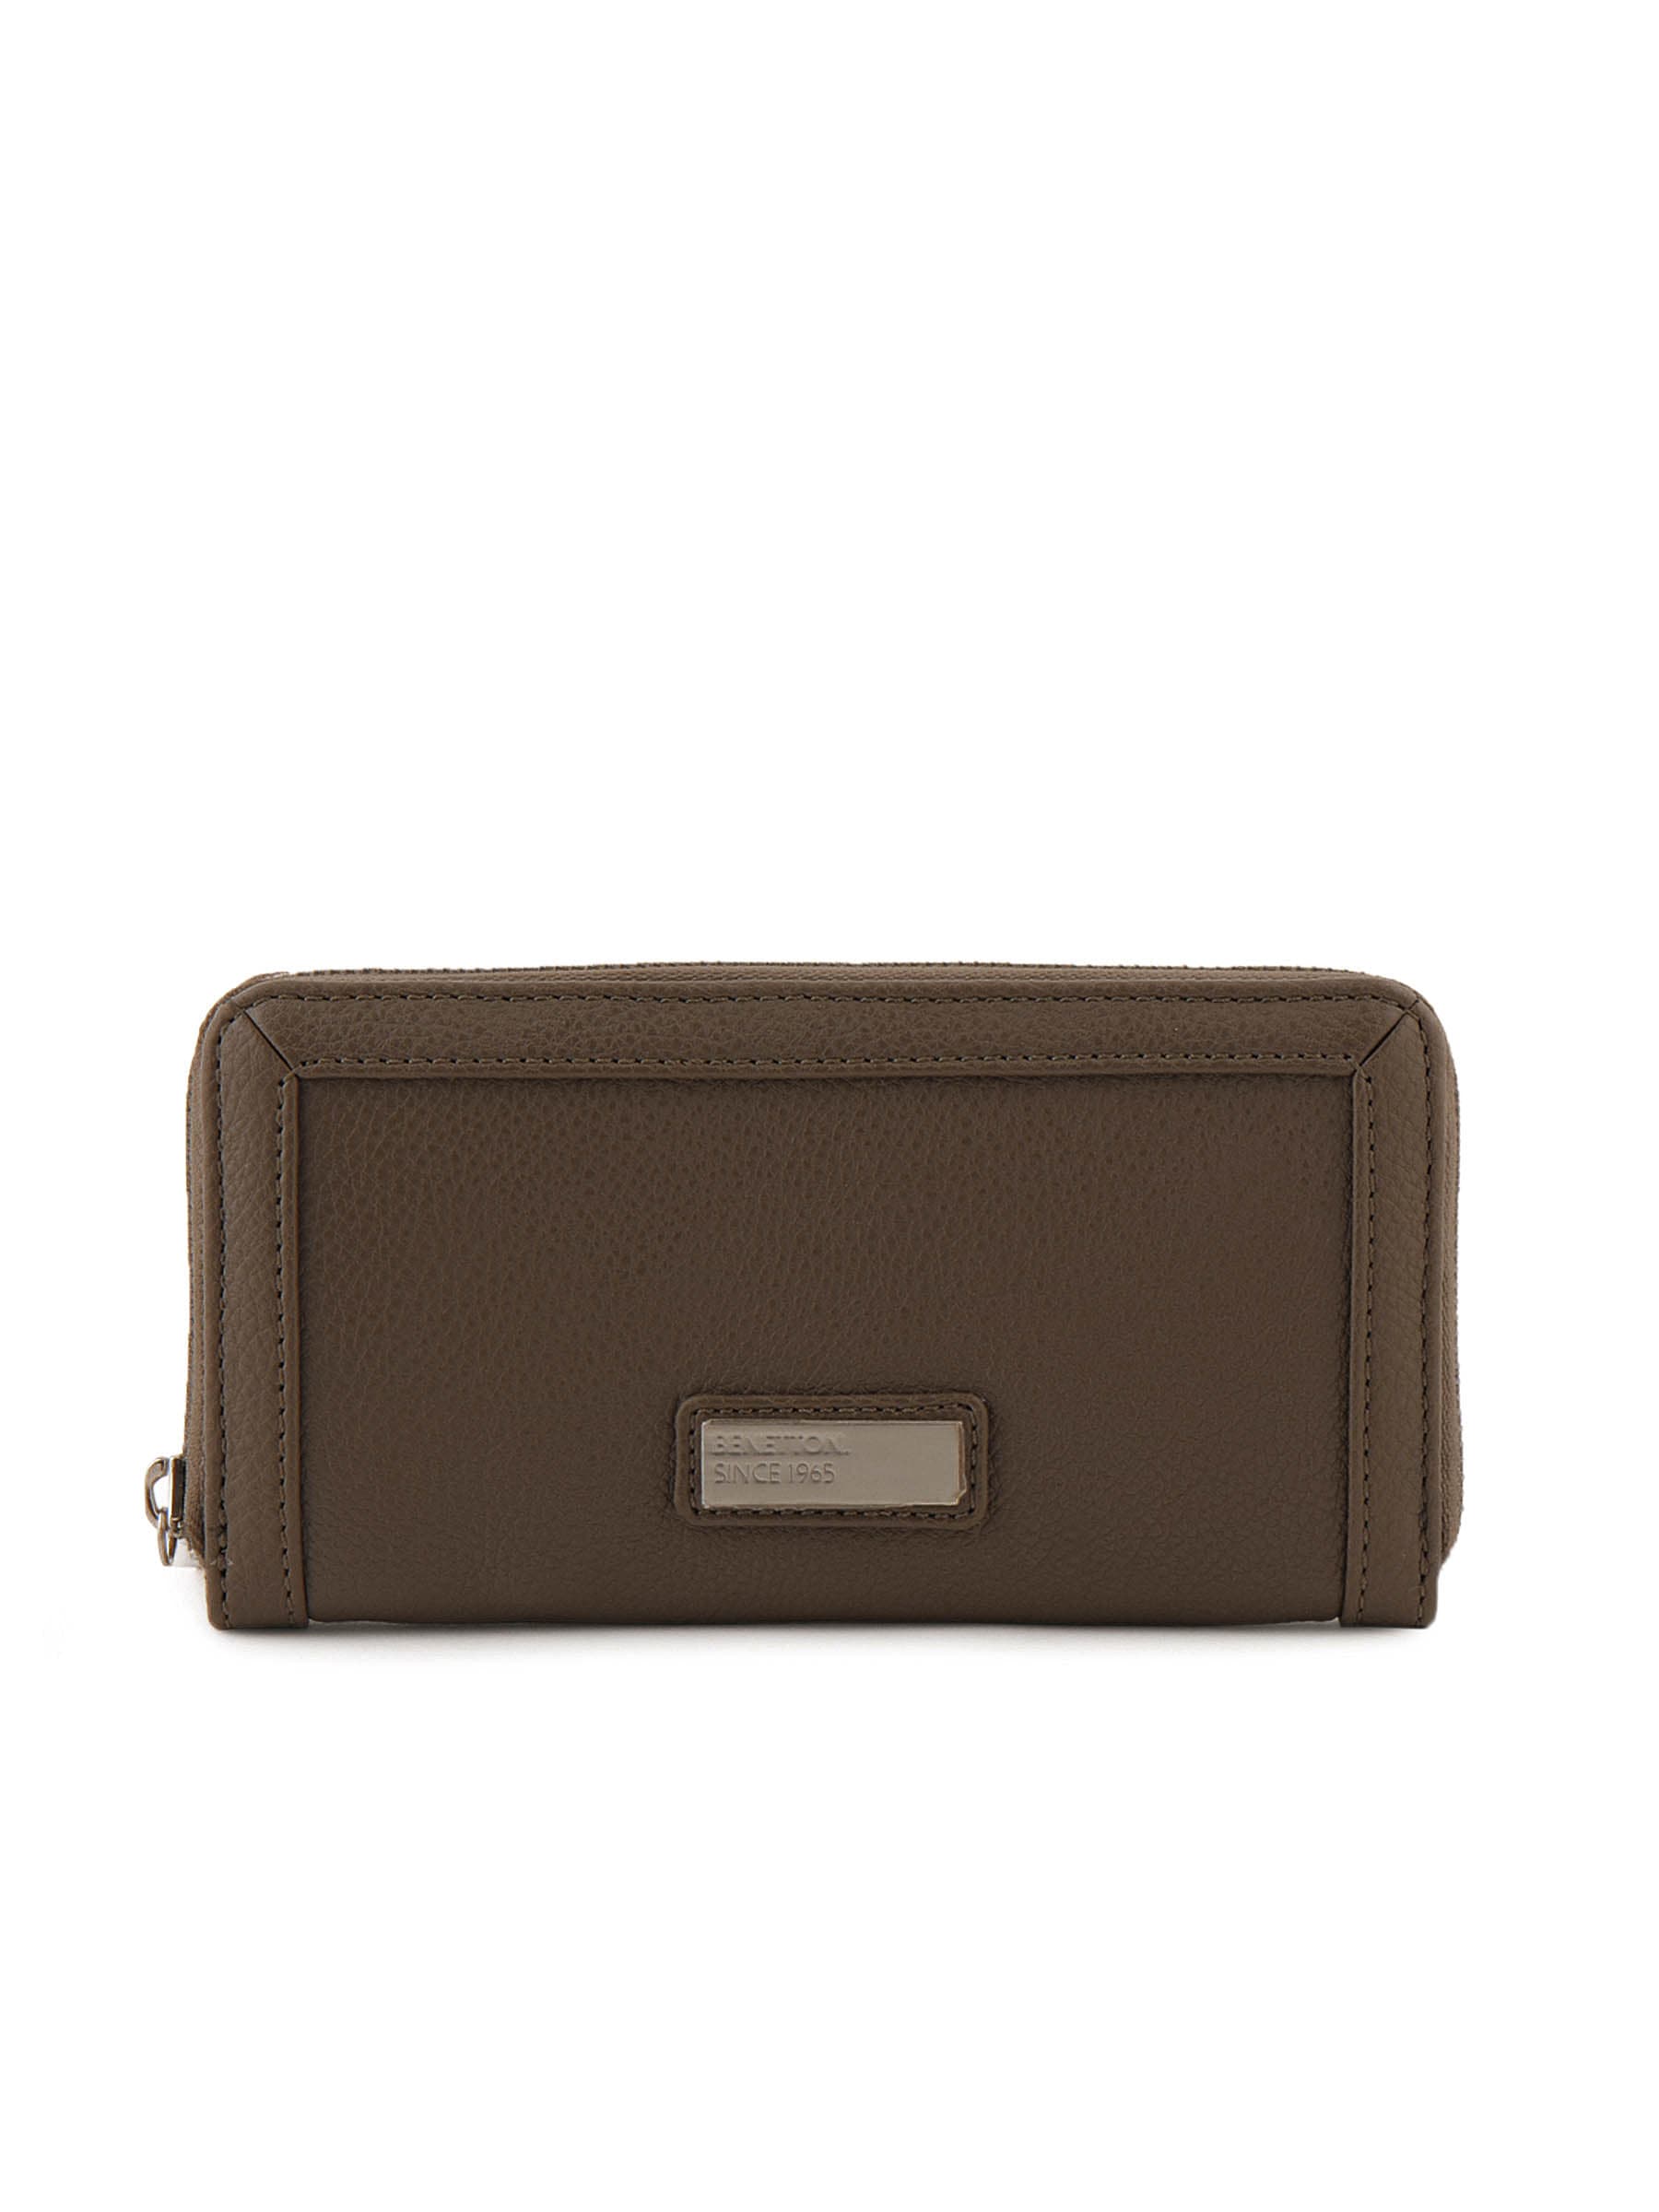 United Colors of Benetton Women Solid Olive Wallets